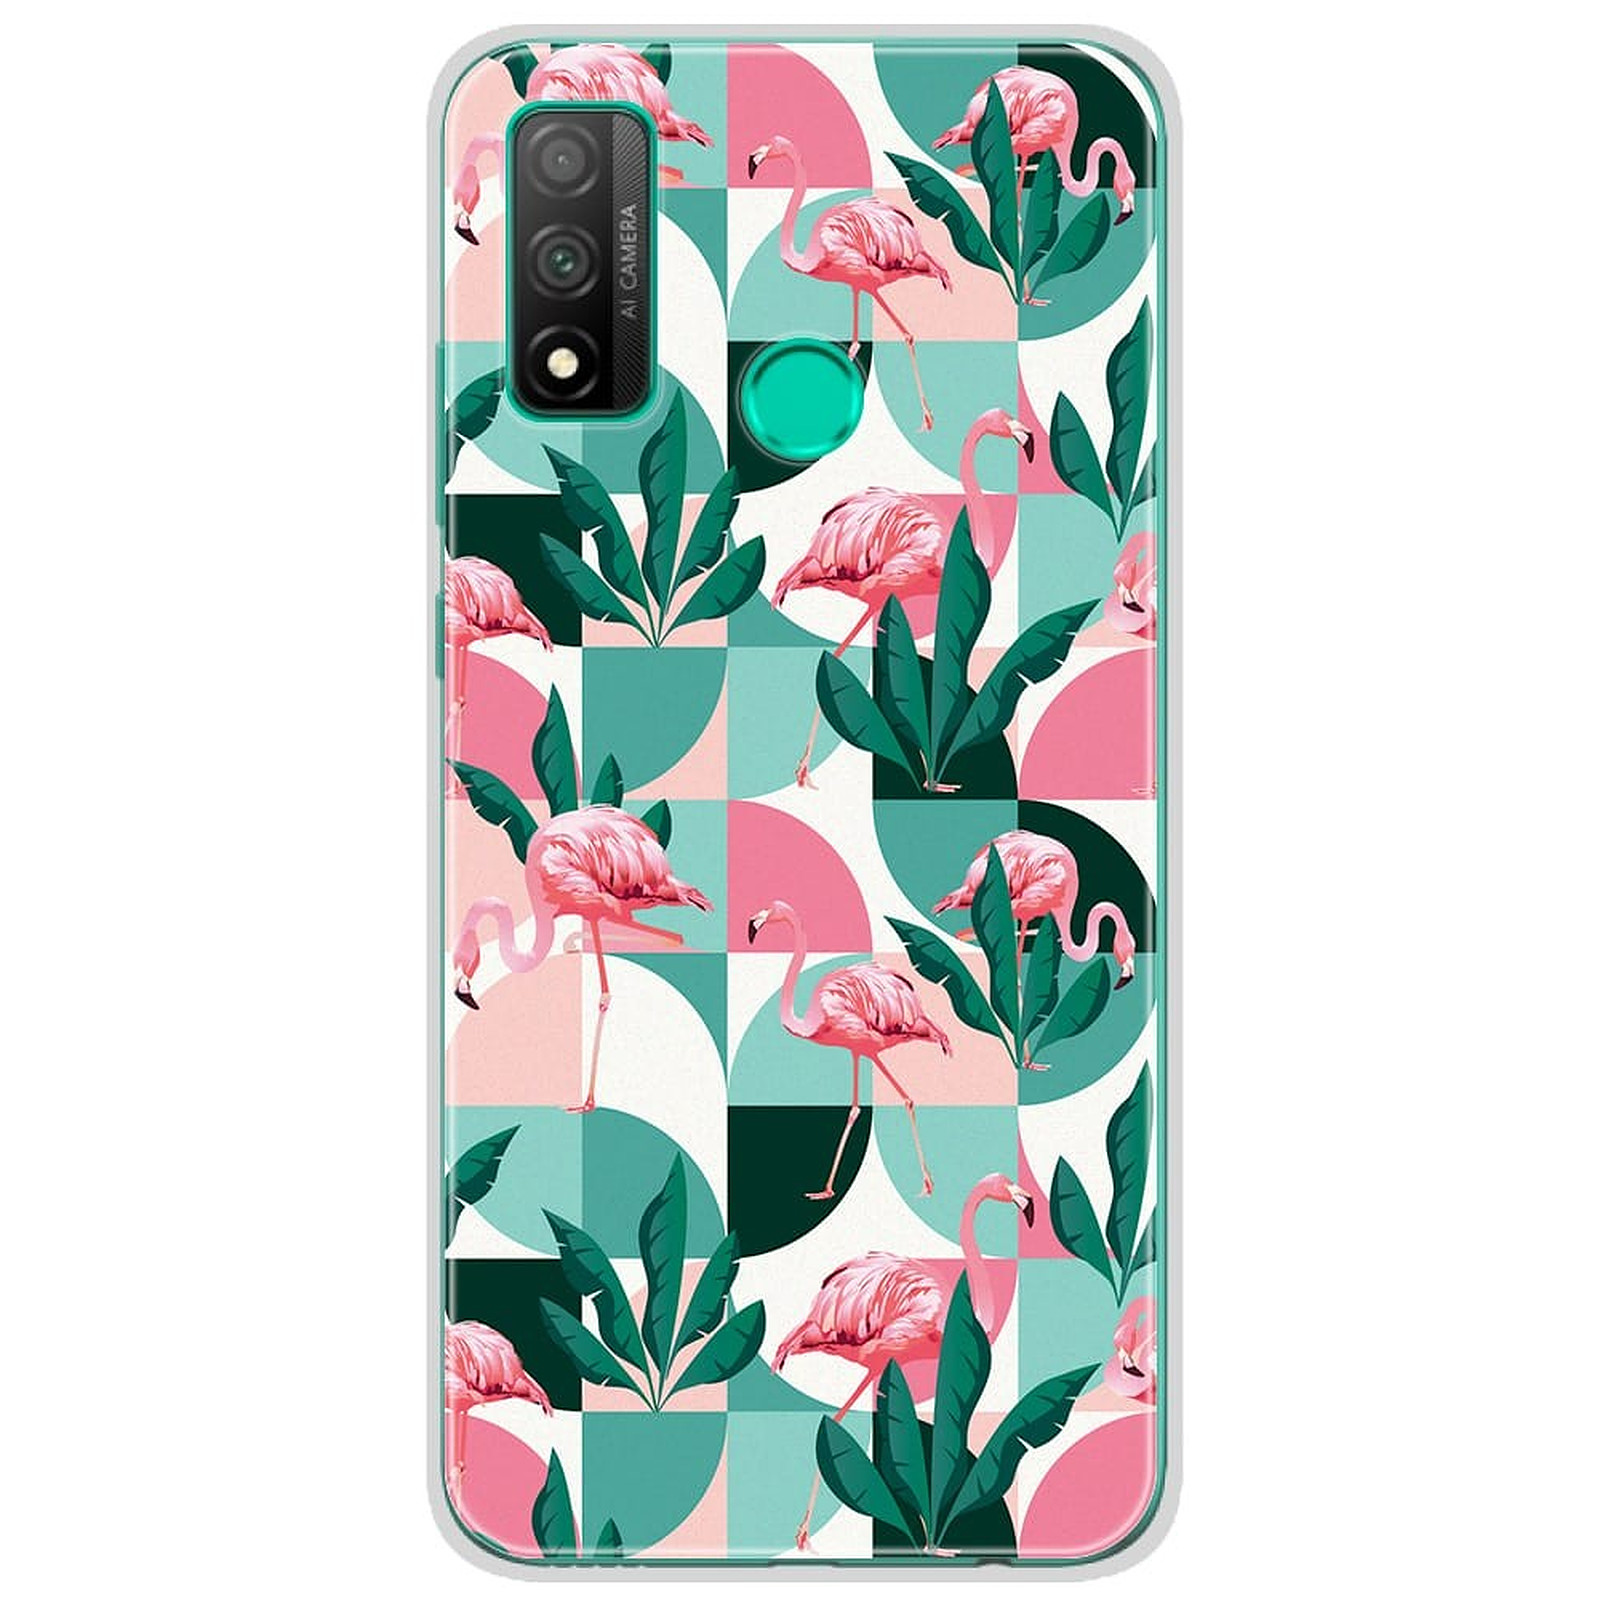 1001 Coques Coque silicone gel Huawei P Smart 2020 motif Flamants Roses ge´ome´trique - Coque telephone 1001Coques